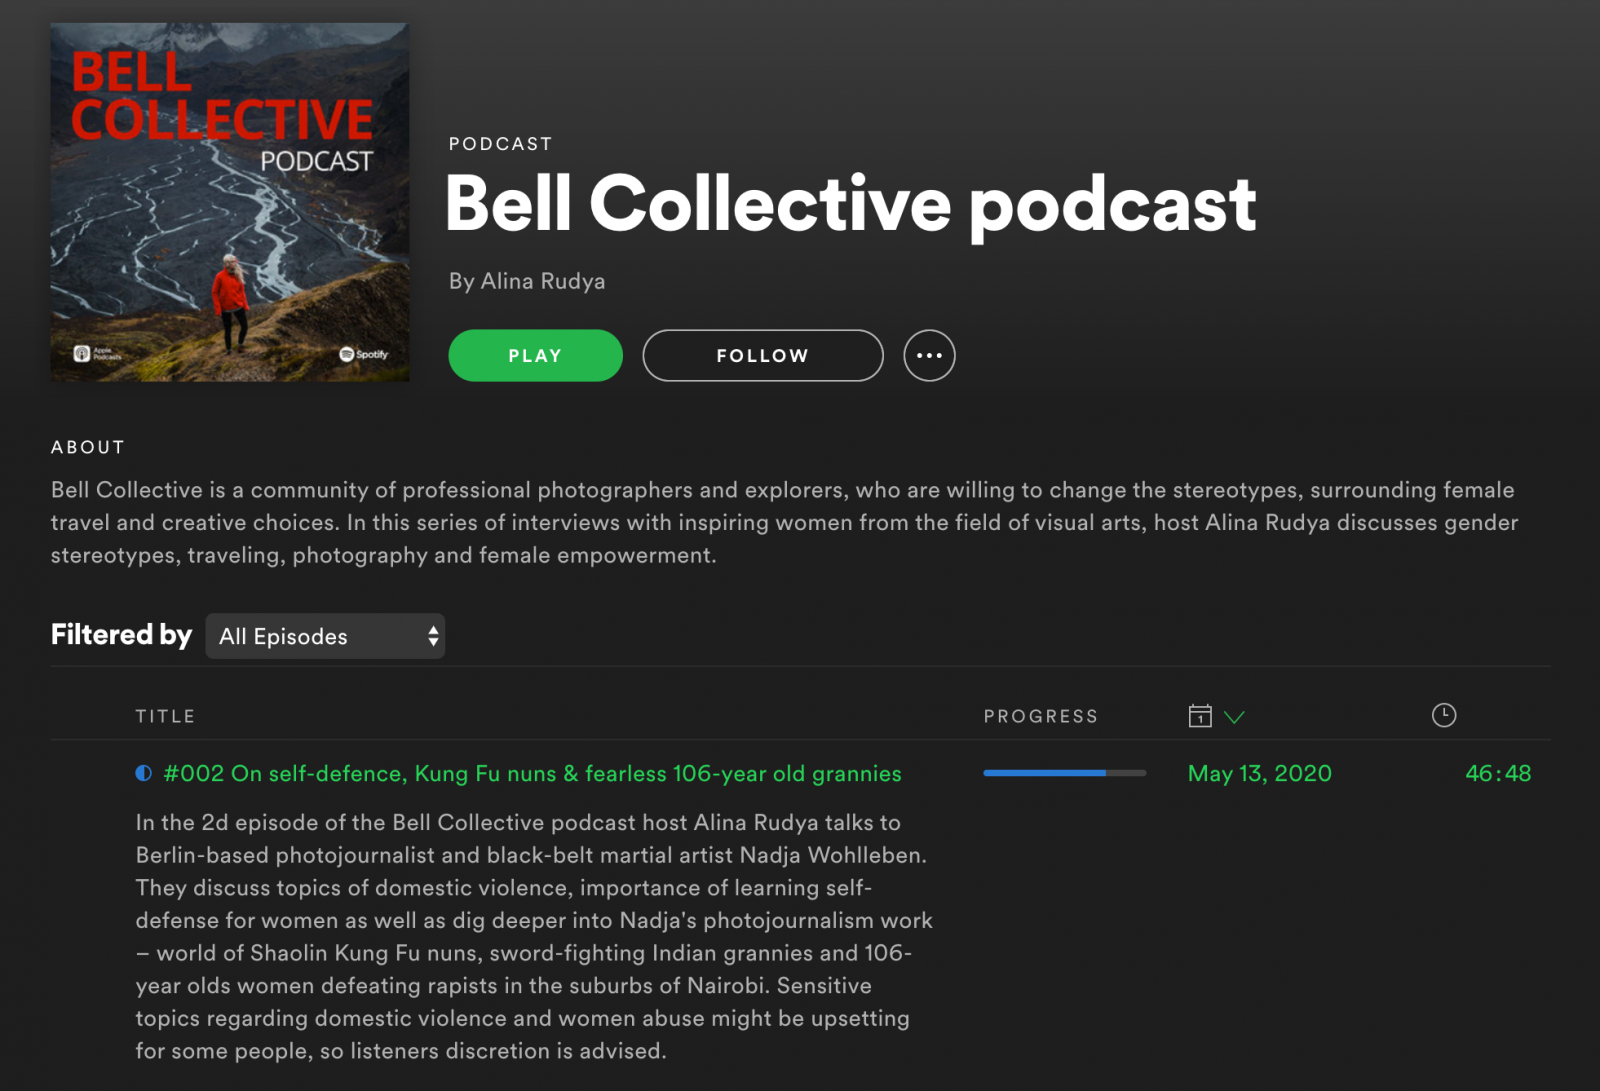 Thumbnail of Podcast Conversation with Alina Rudya/ Bell Collective